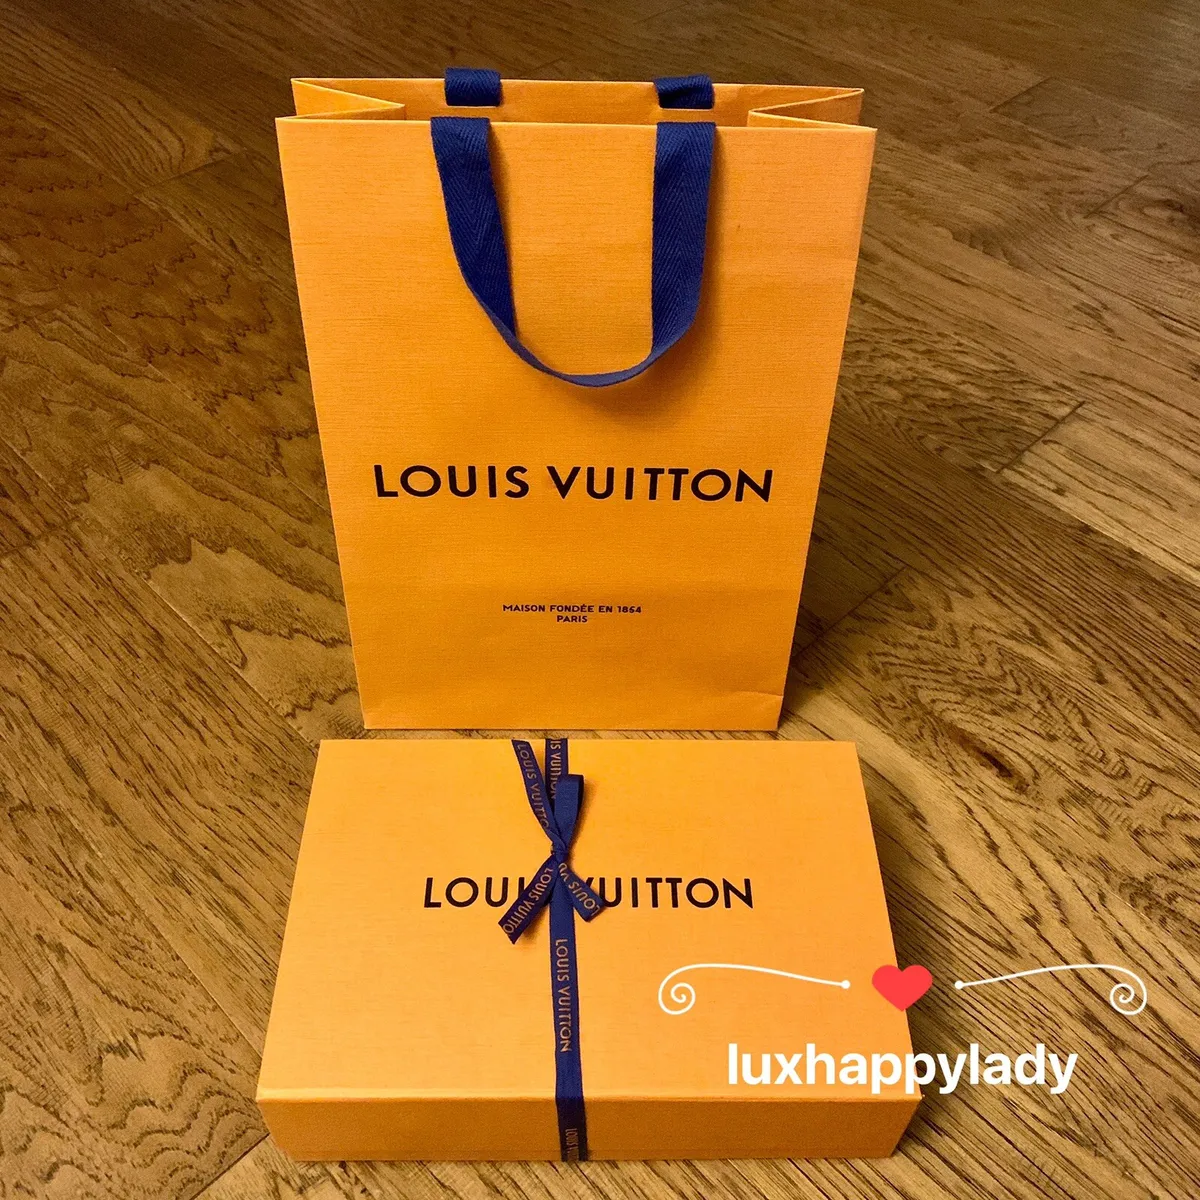 Authentic LOUIS VUITTON Empty Magnetic Box Gift Bag and store tissue paper